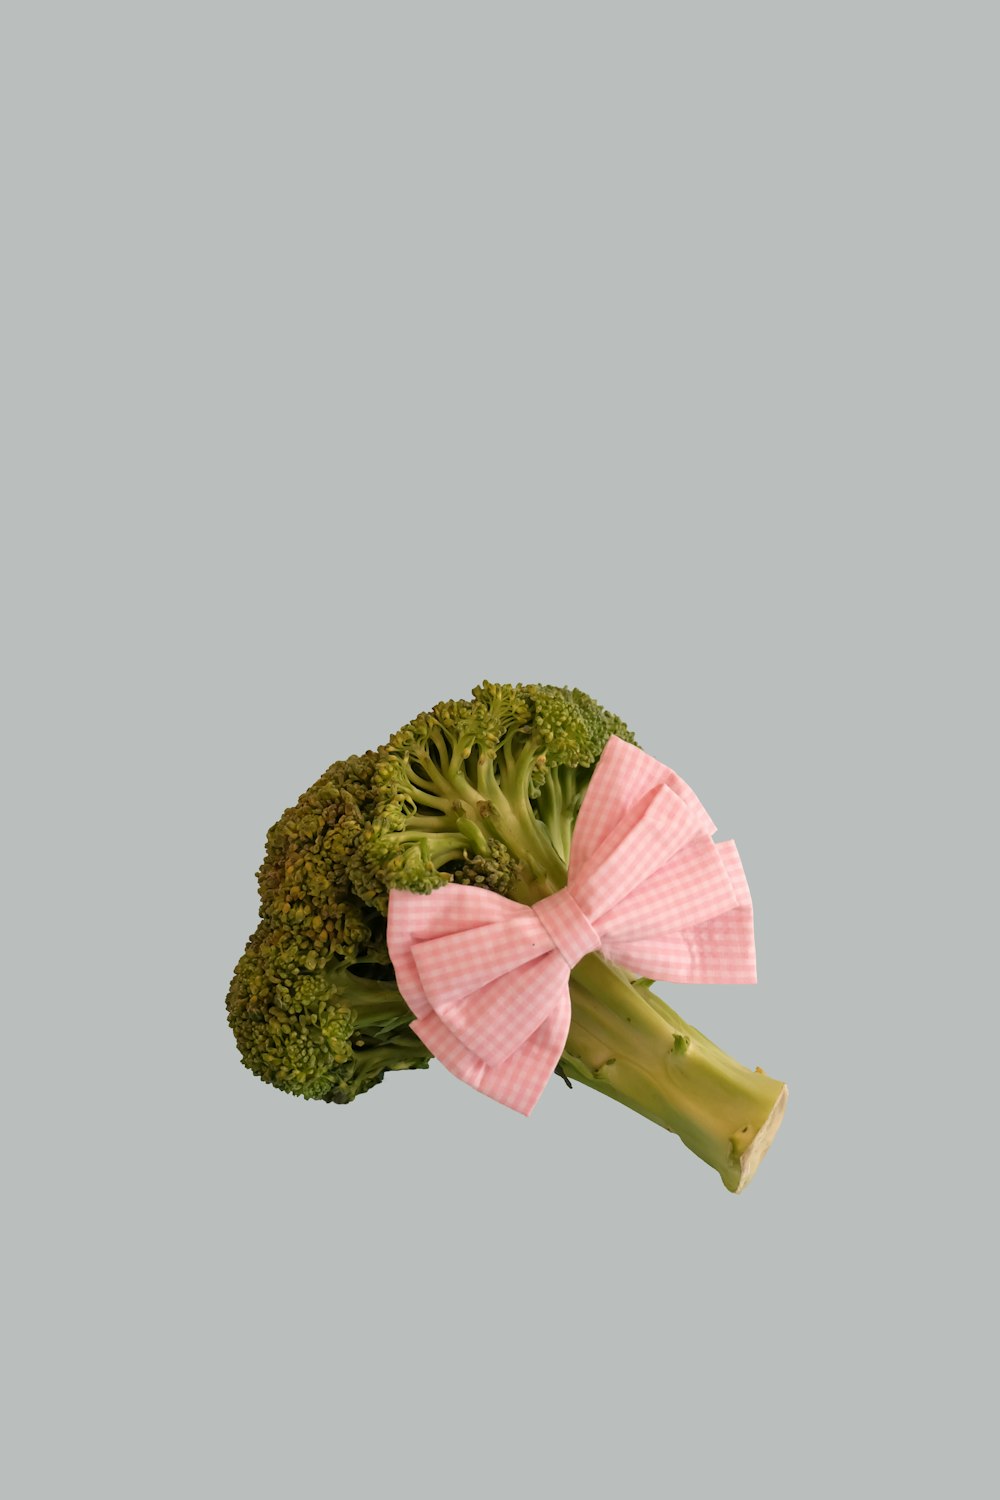 broccoli vegetable with pink ribbon